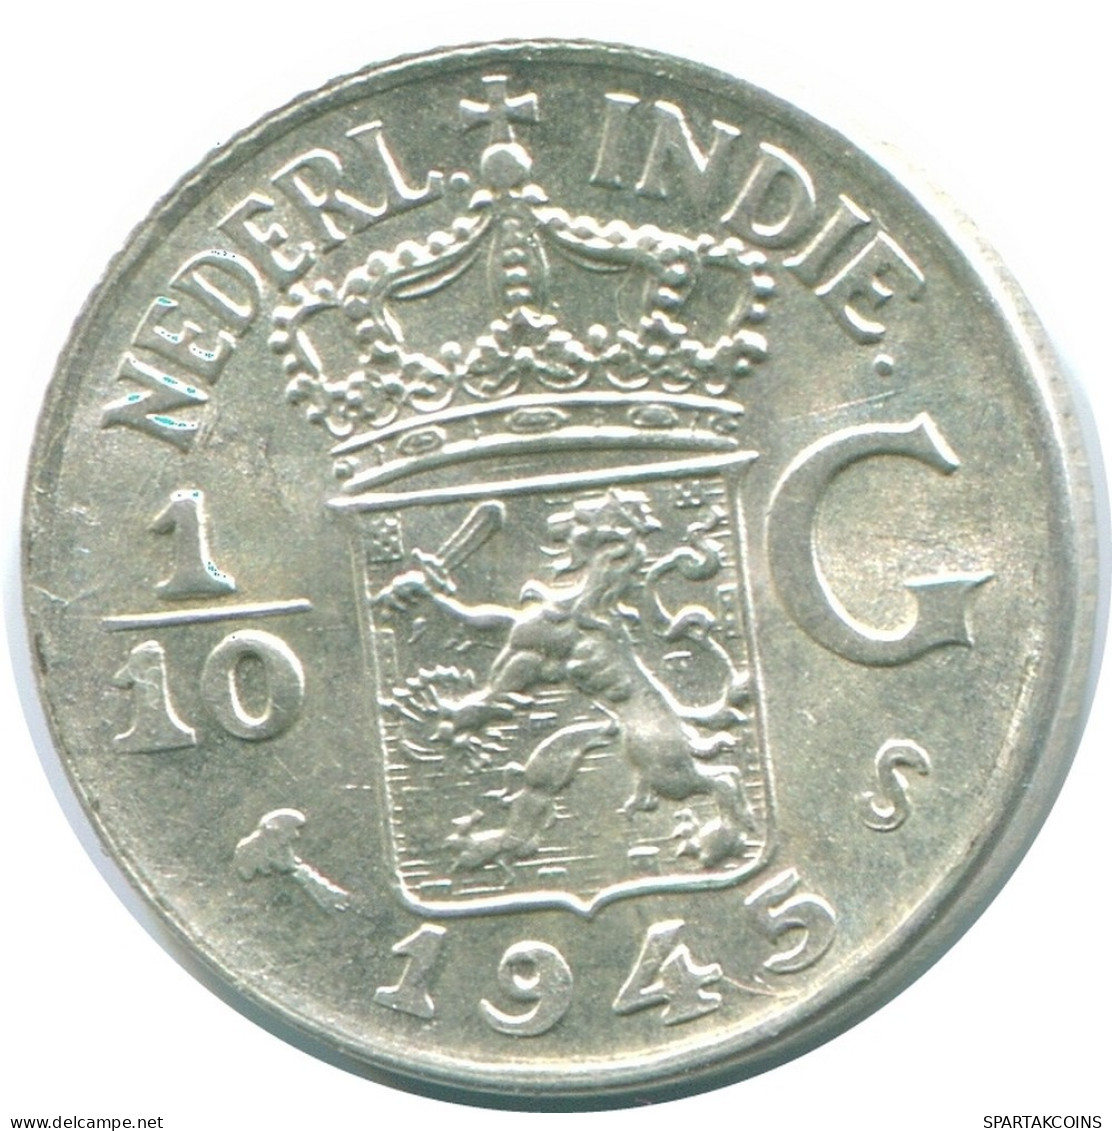 1/10 GULDEN 1945 S NETHERLANDS EAST INDIES SILVER Colonial Coin #NL13987.3.U.A - Indes Neerlandesas